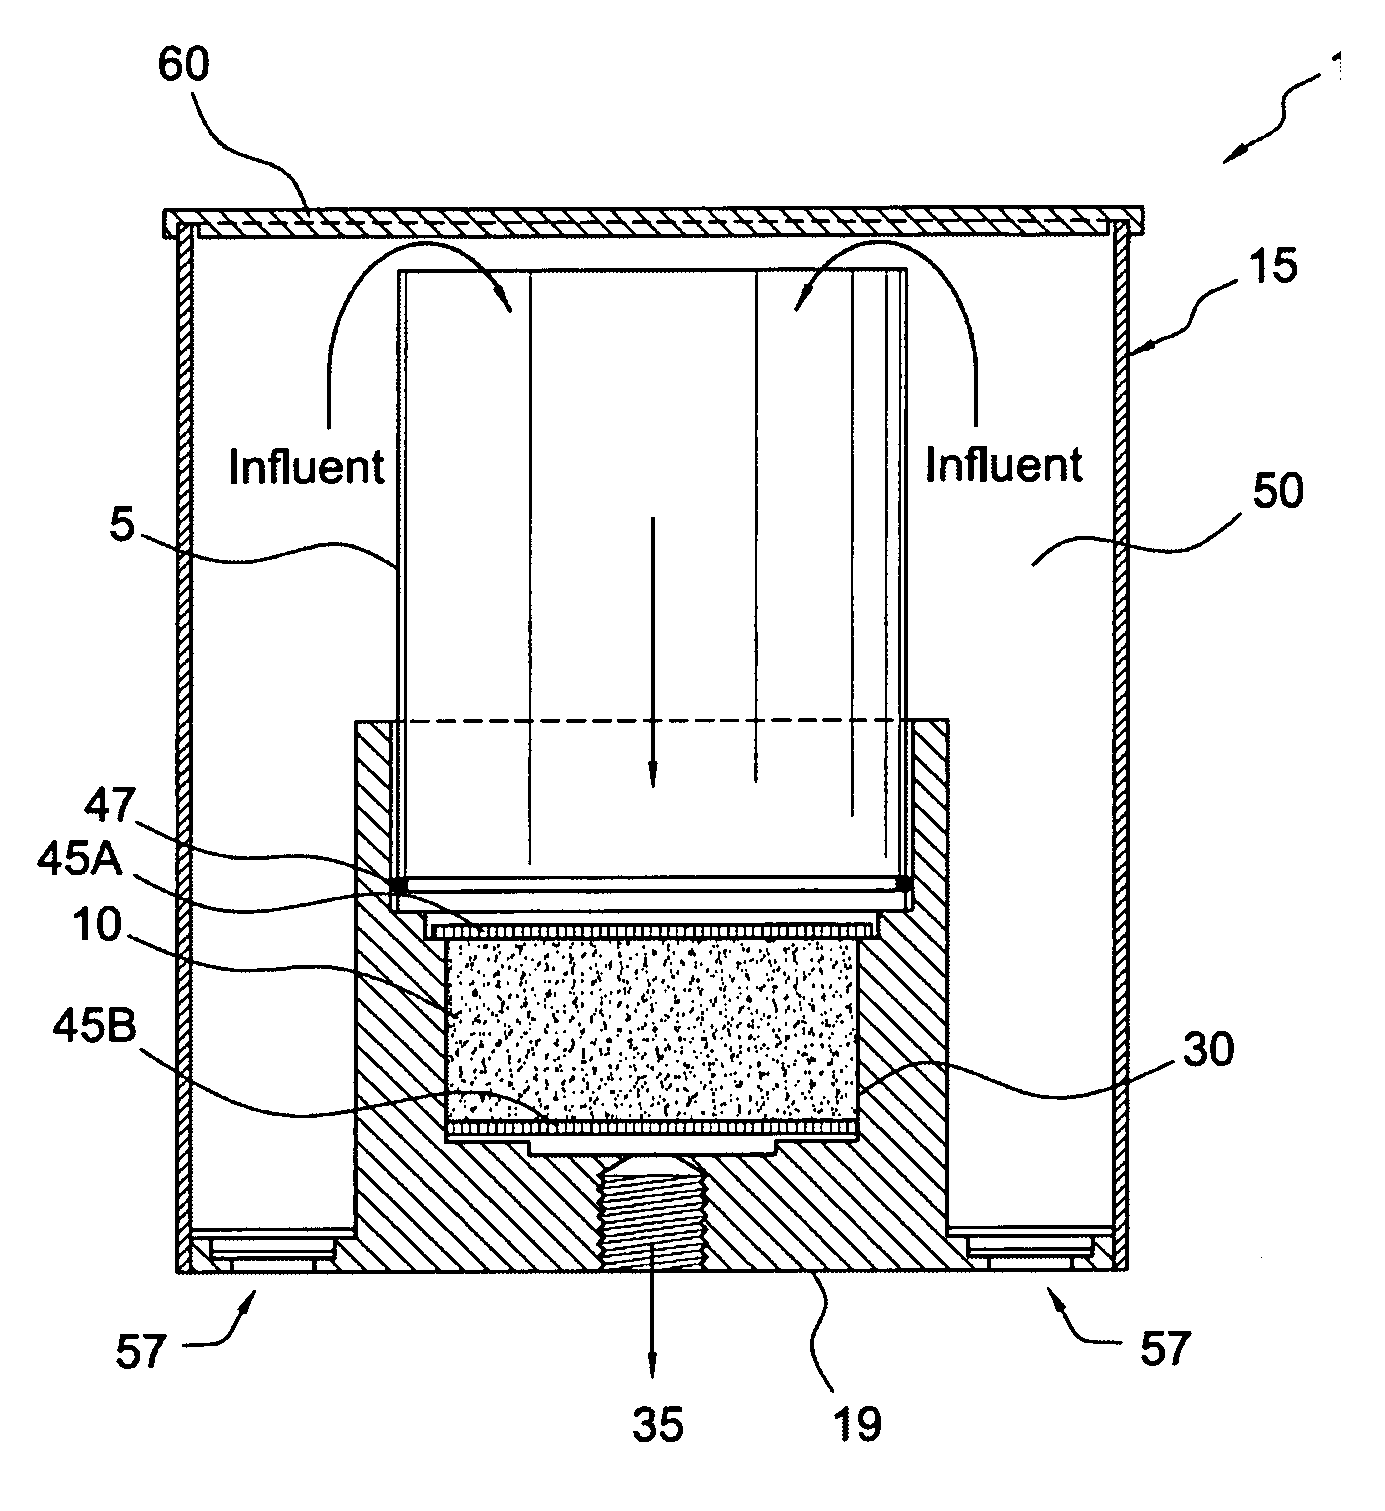 Microfiltration devices